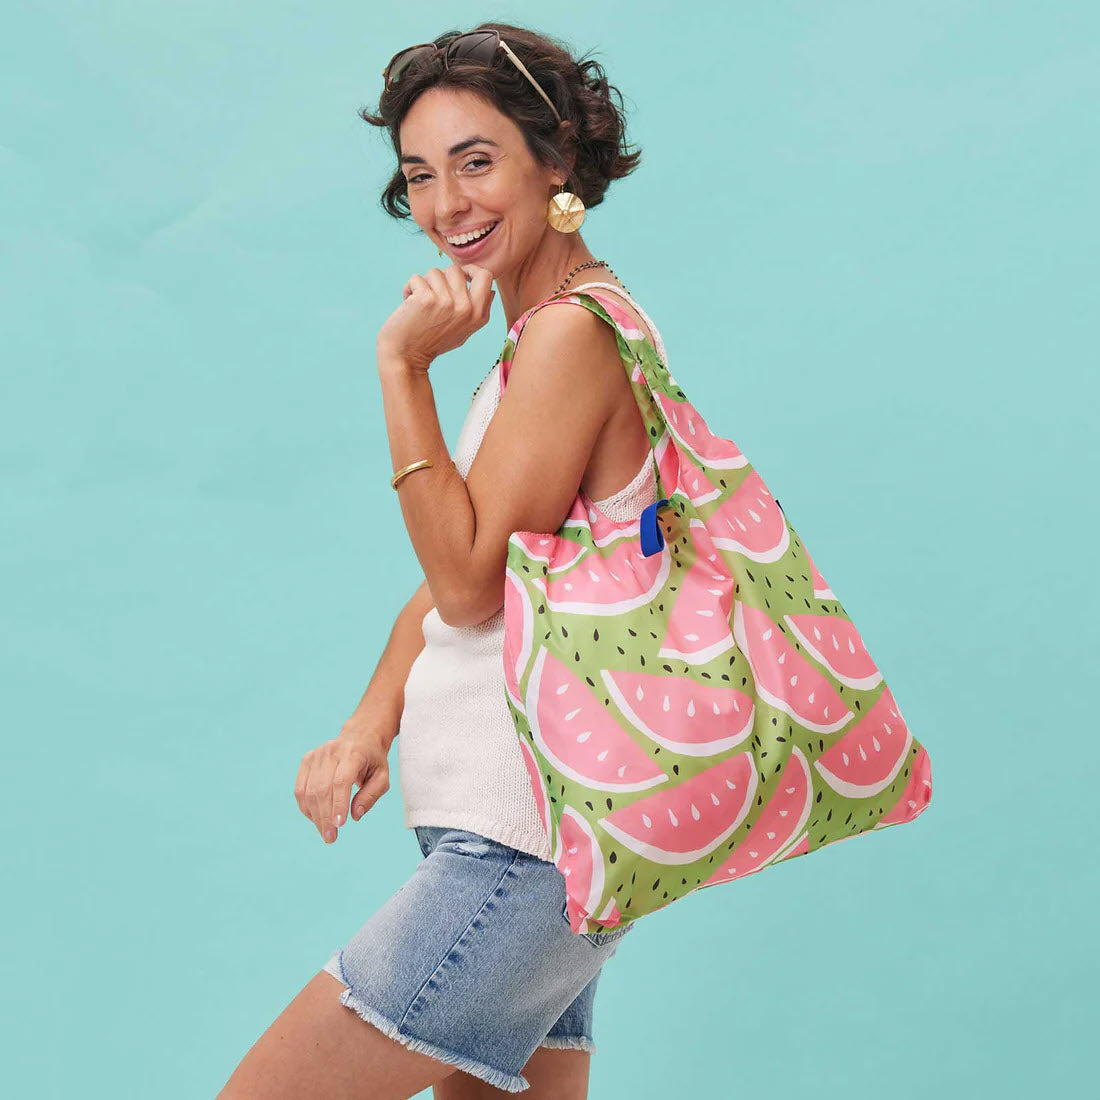 Woman smiling, carrying a large BLU BAG WATERMELON reusable shopping bag on her shoulder, dressed in a white top and denim shorts, against a teal background.